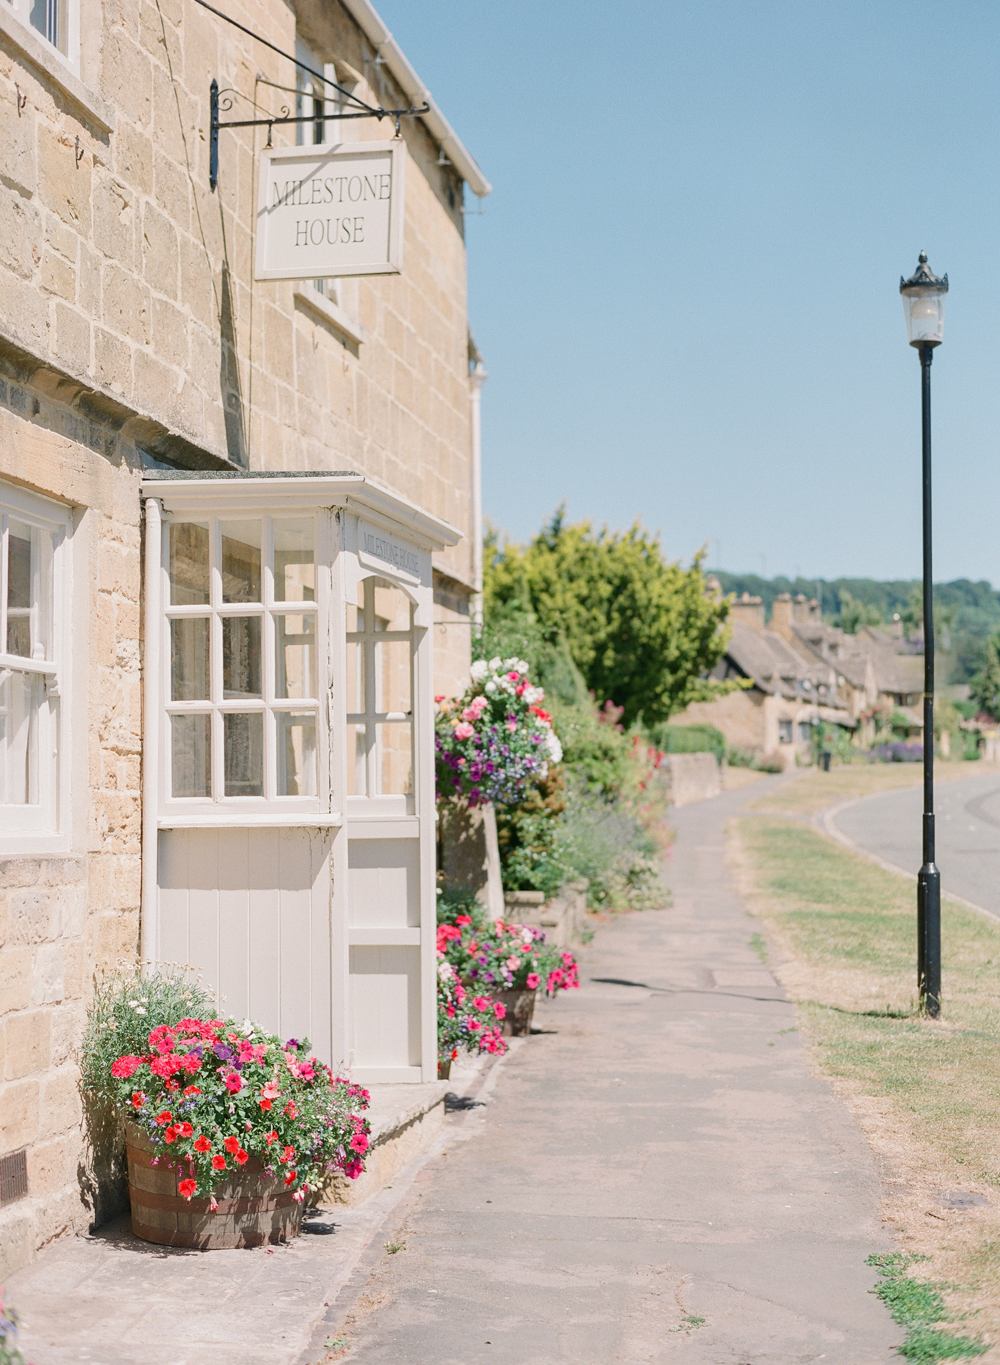 Cotswolds Wedding Photographer | England Wedding Photography | Cotswolds Travel Guide | Molly Carr Photography | Broadway, England